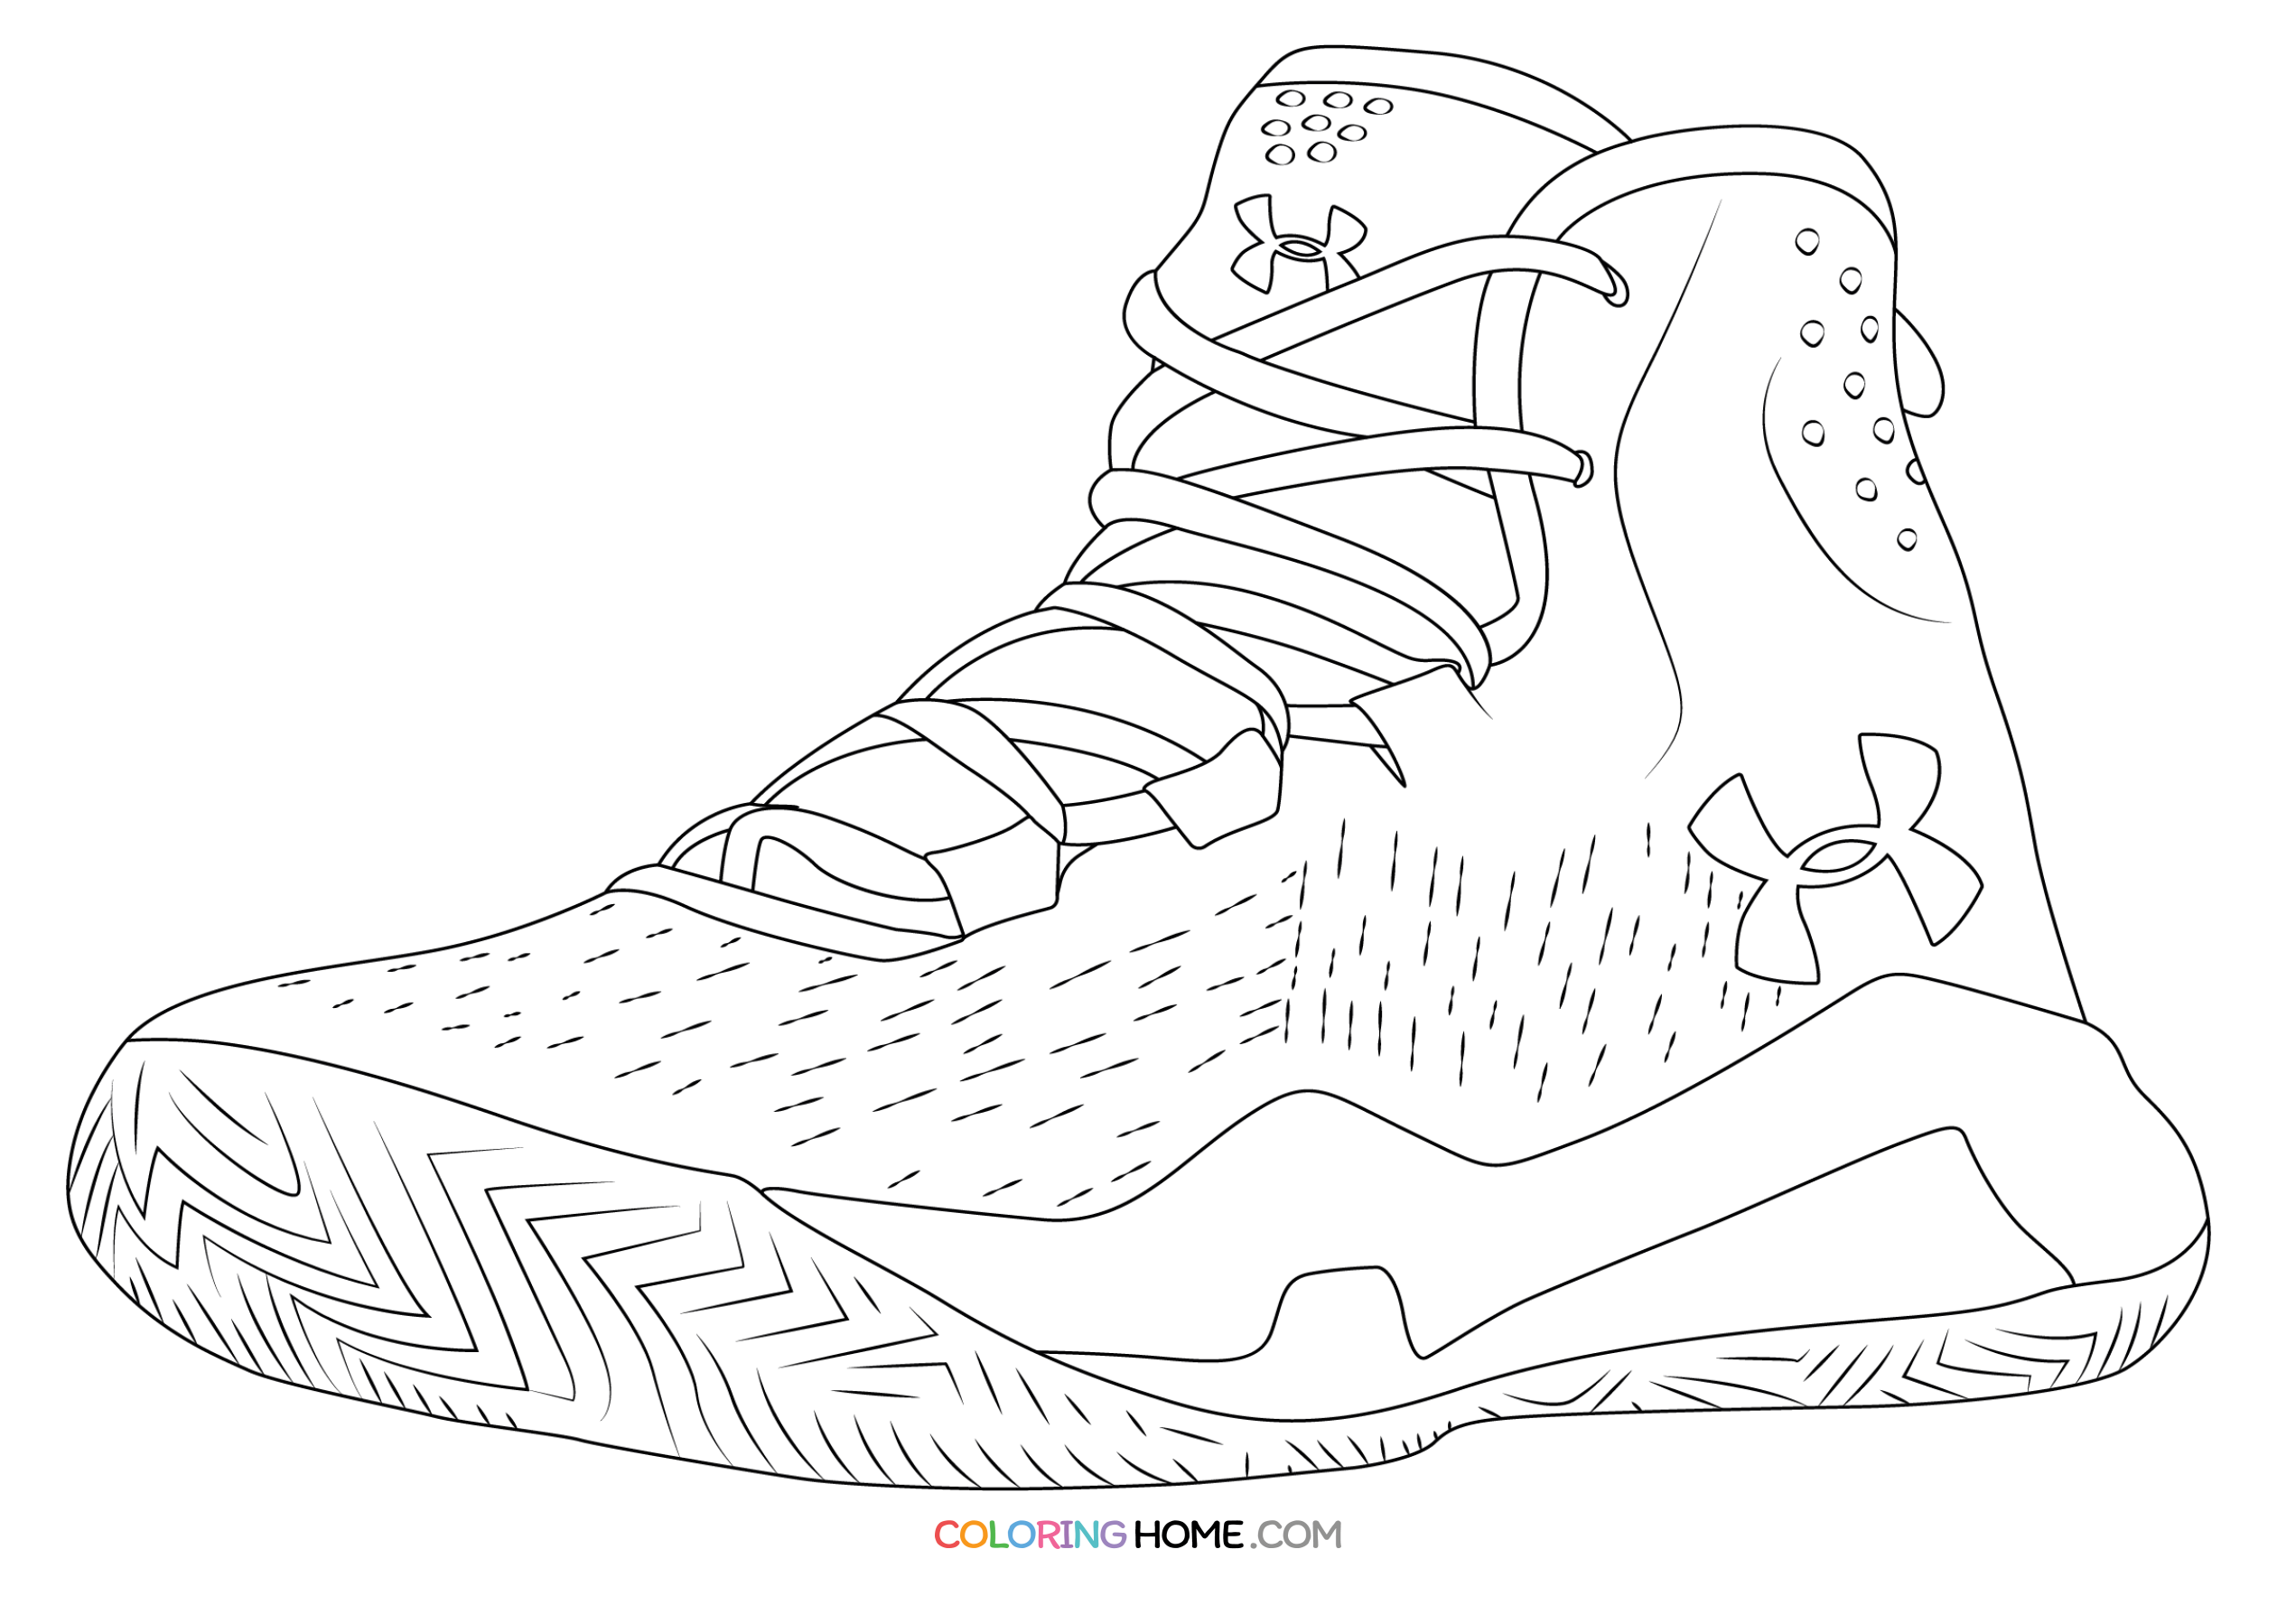 Under Armour Coloring Page - Coloring Home